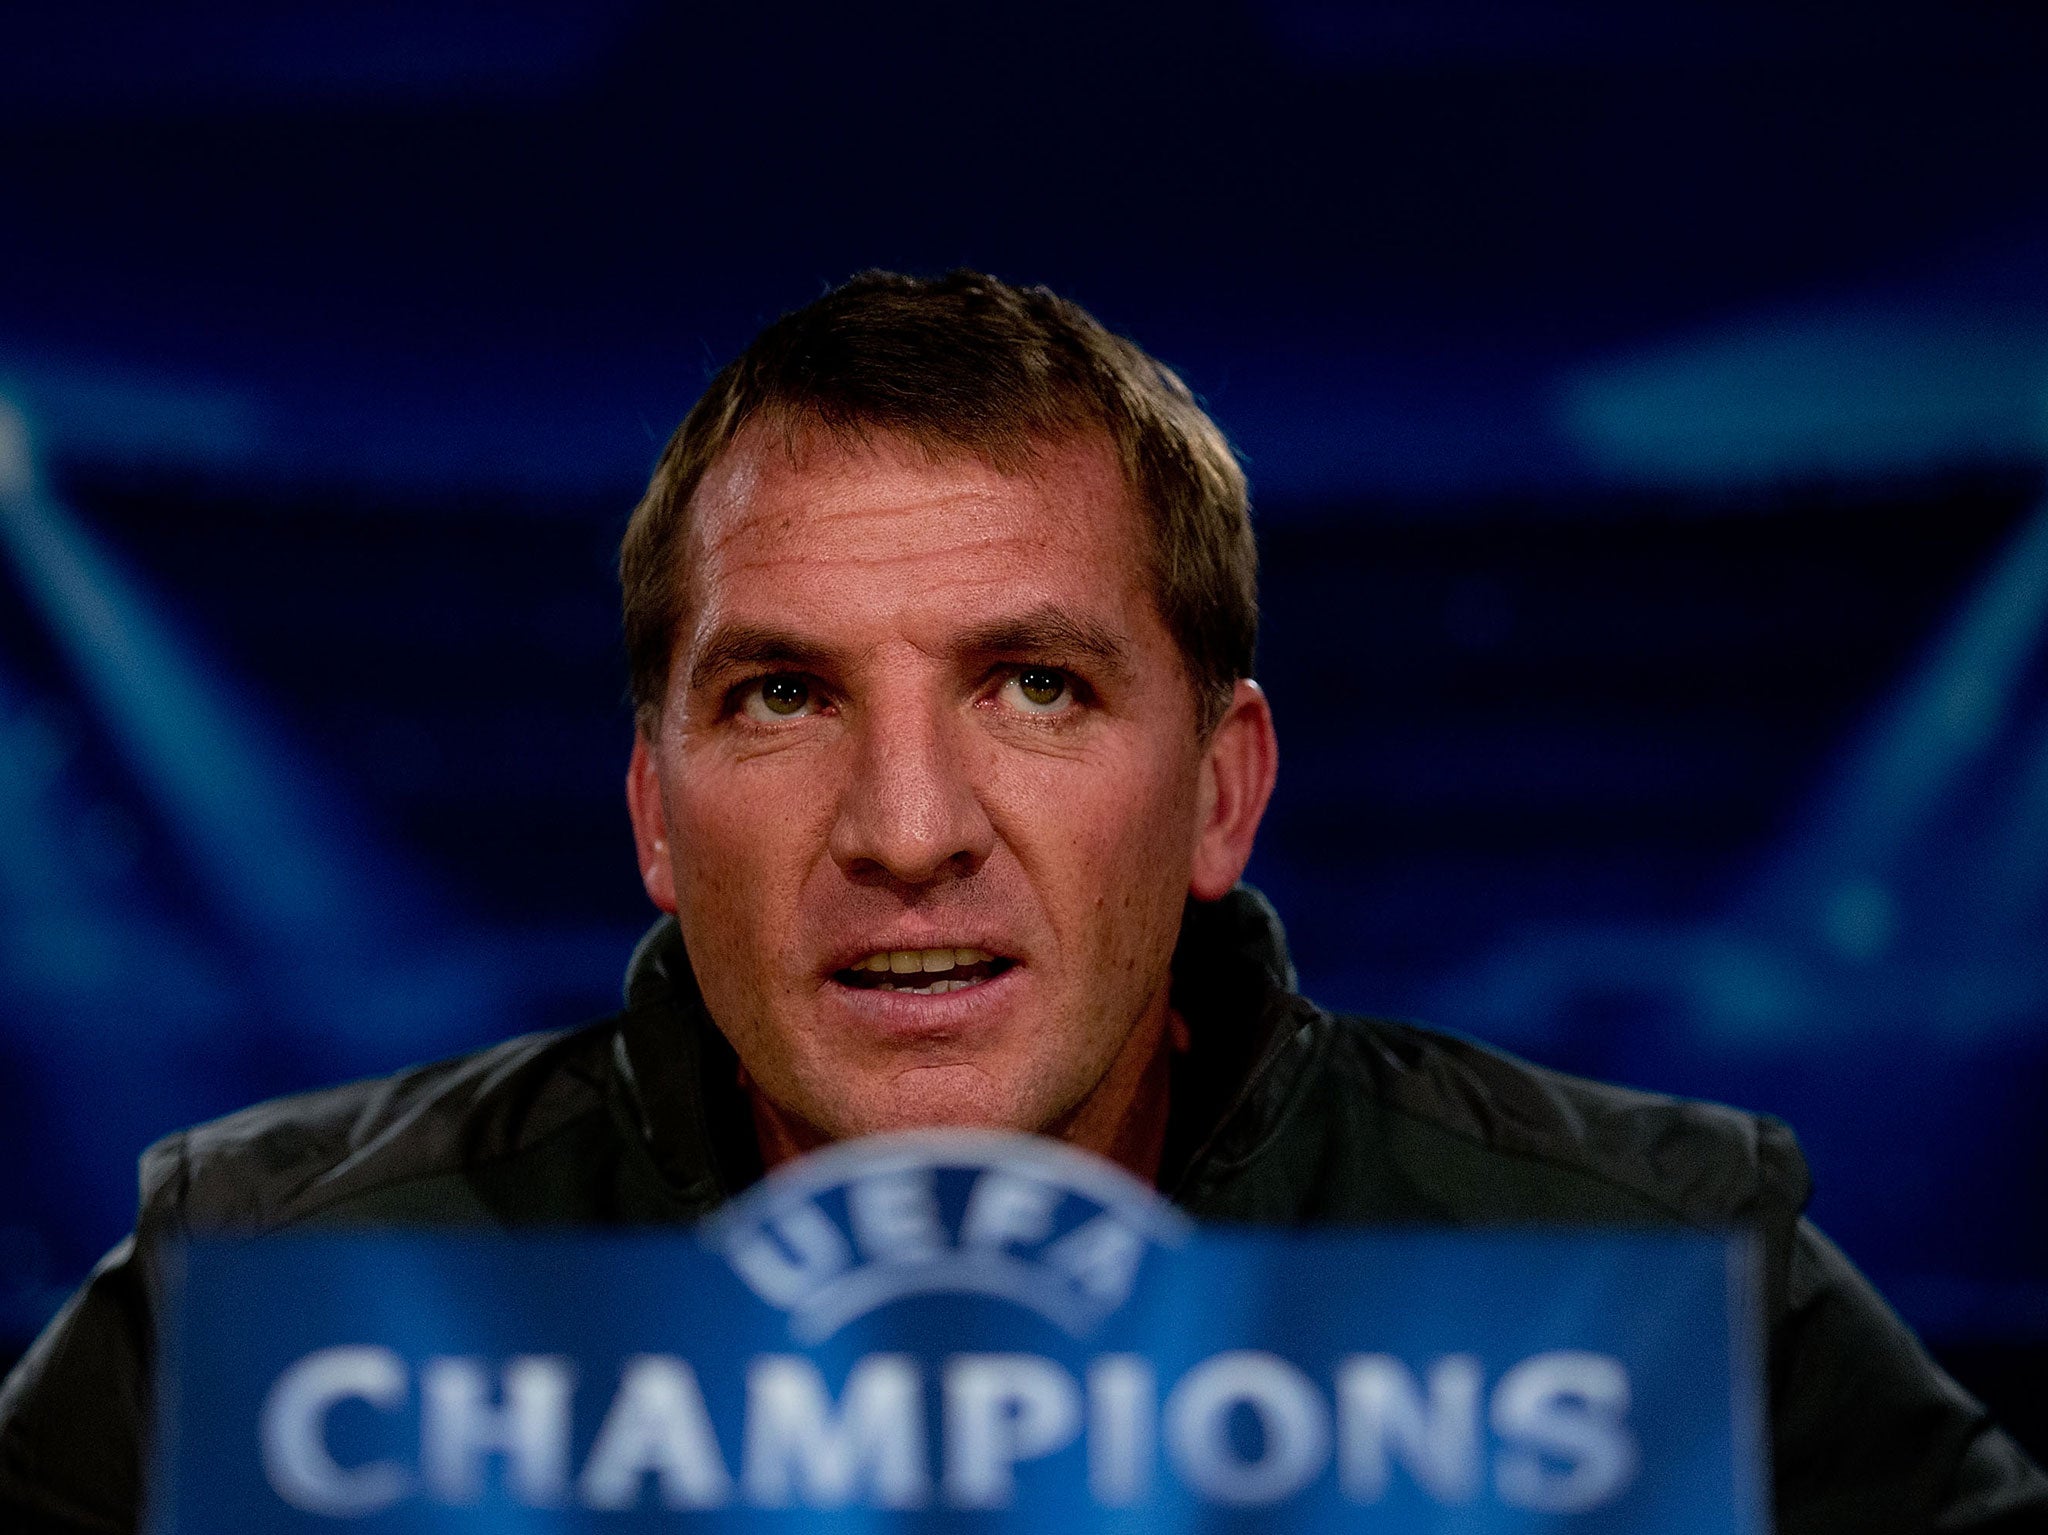 Sheamus believes Liverpool are in safe hands with Rodgers as manager